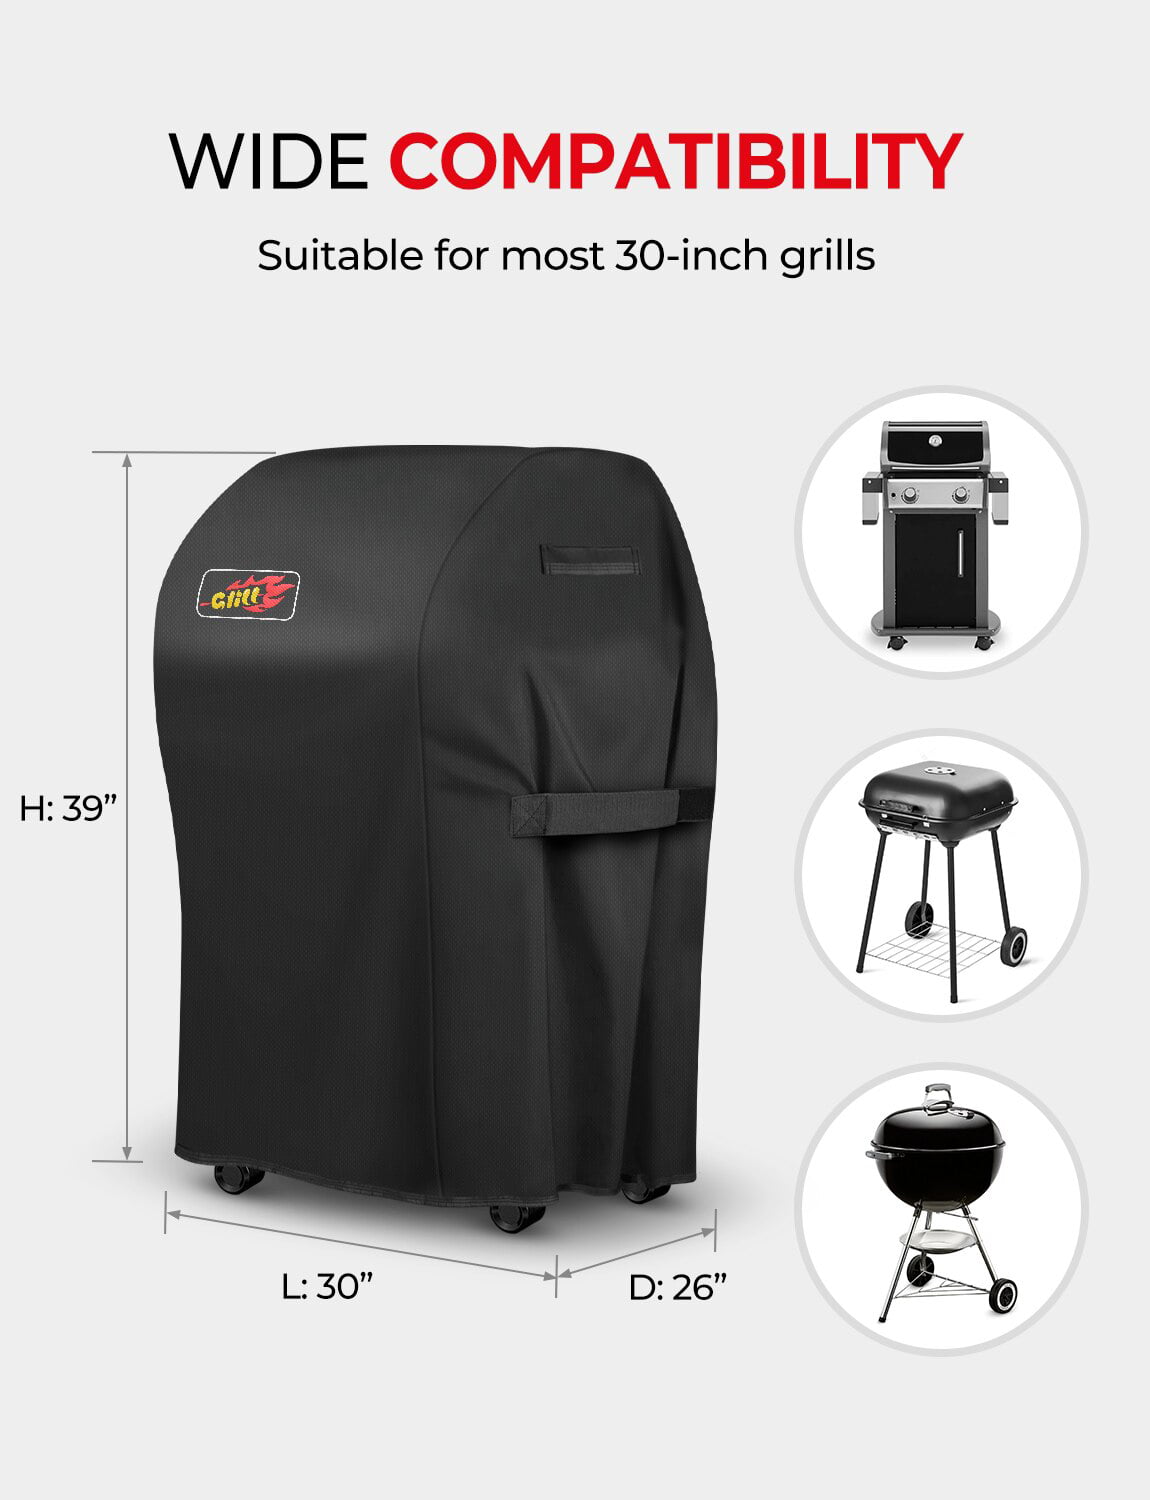 600D Heavy Duty Gas Grill 58-Inch Waterproof BBQ Cover VicTsing Grill Cover 